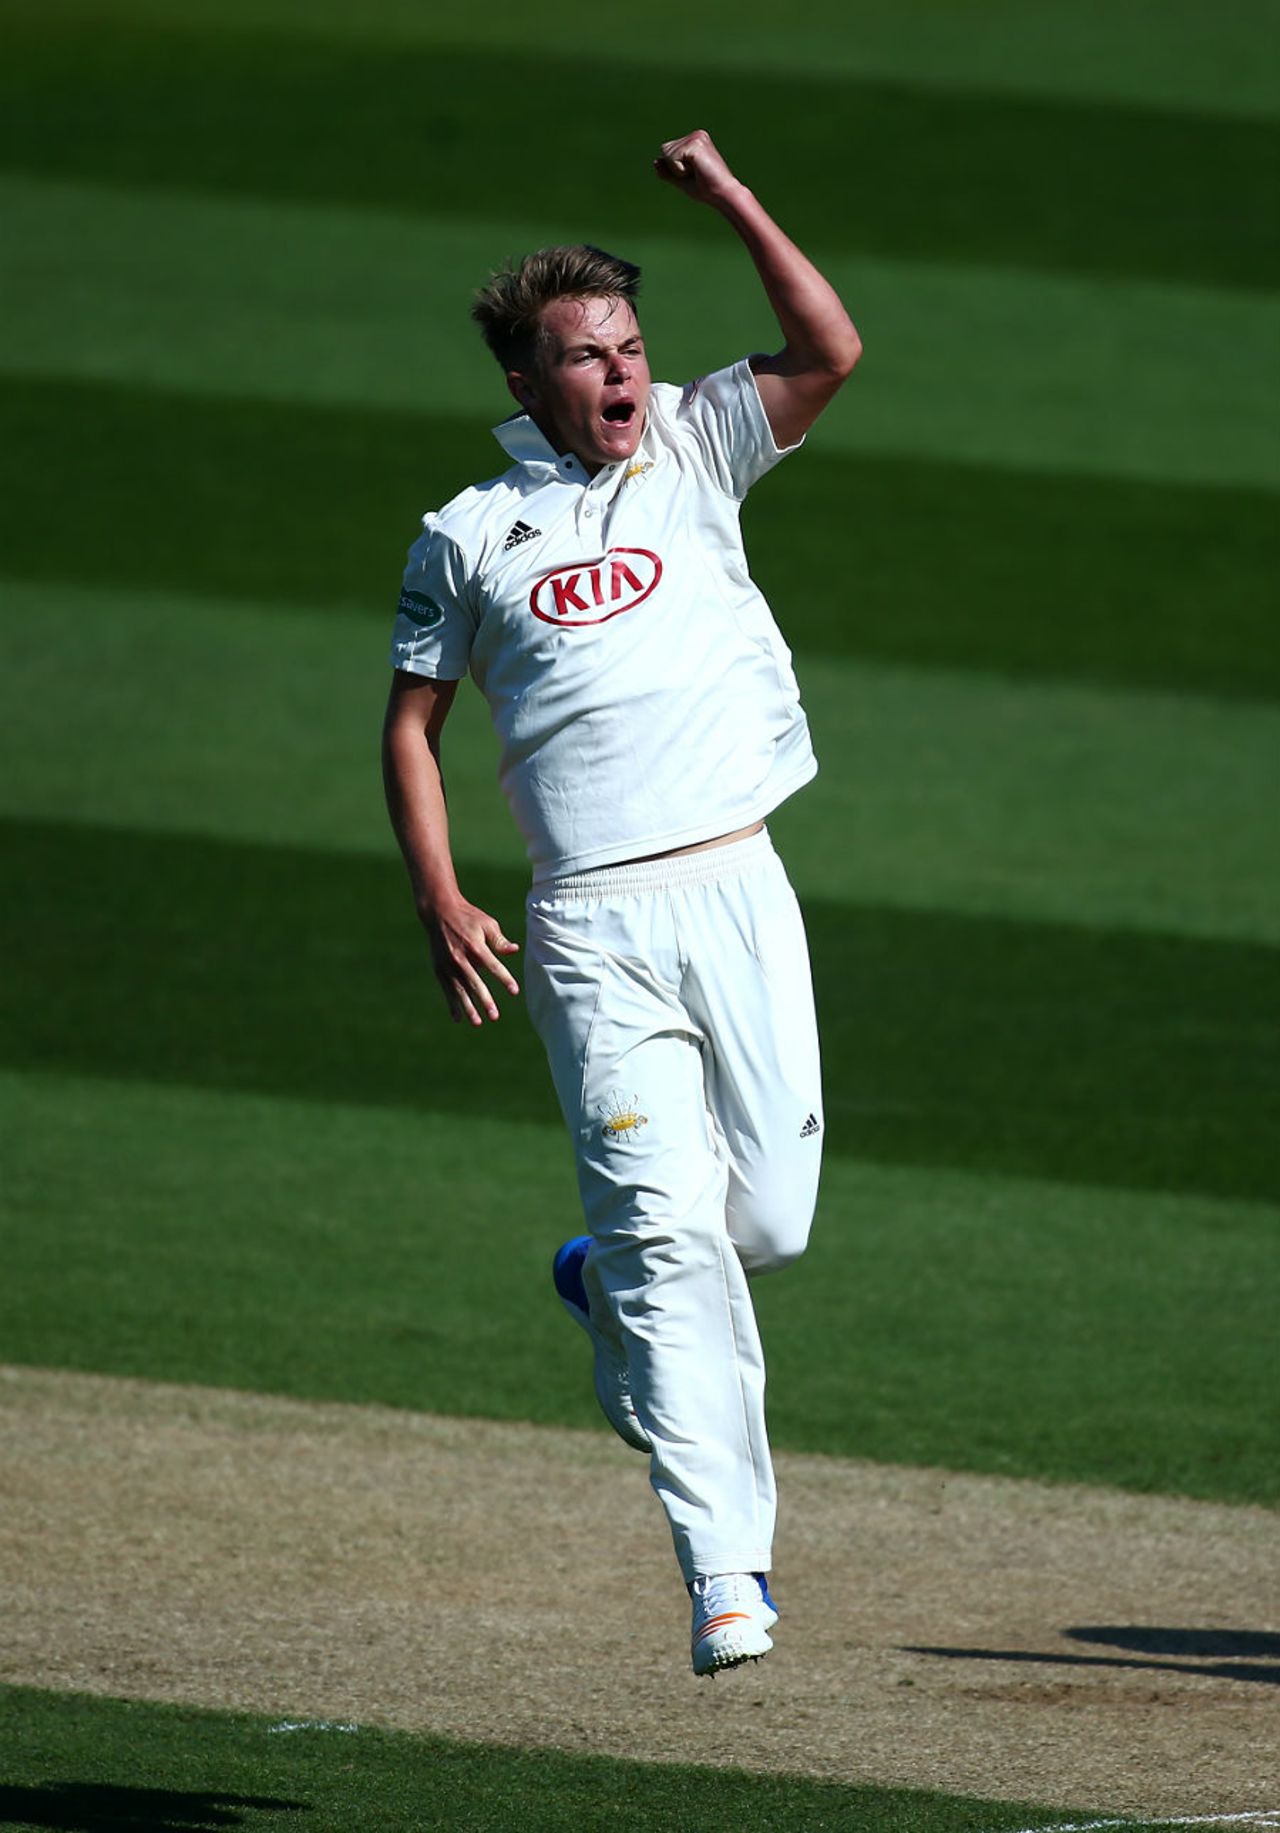 Sam Curran celebrates the wicket of Will Porterfield Surrey v Warwickshire, Specsavers County Championship, 3rd day, The Kia Oval, April 9, 2017